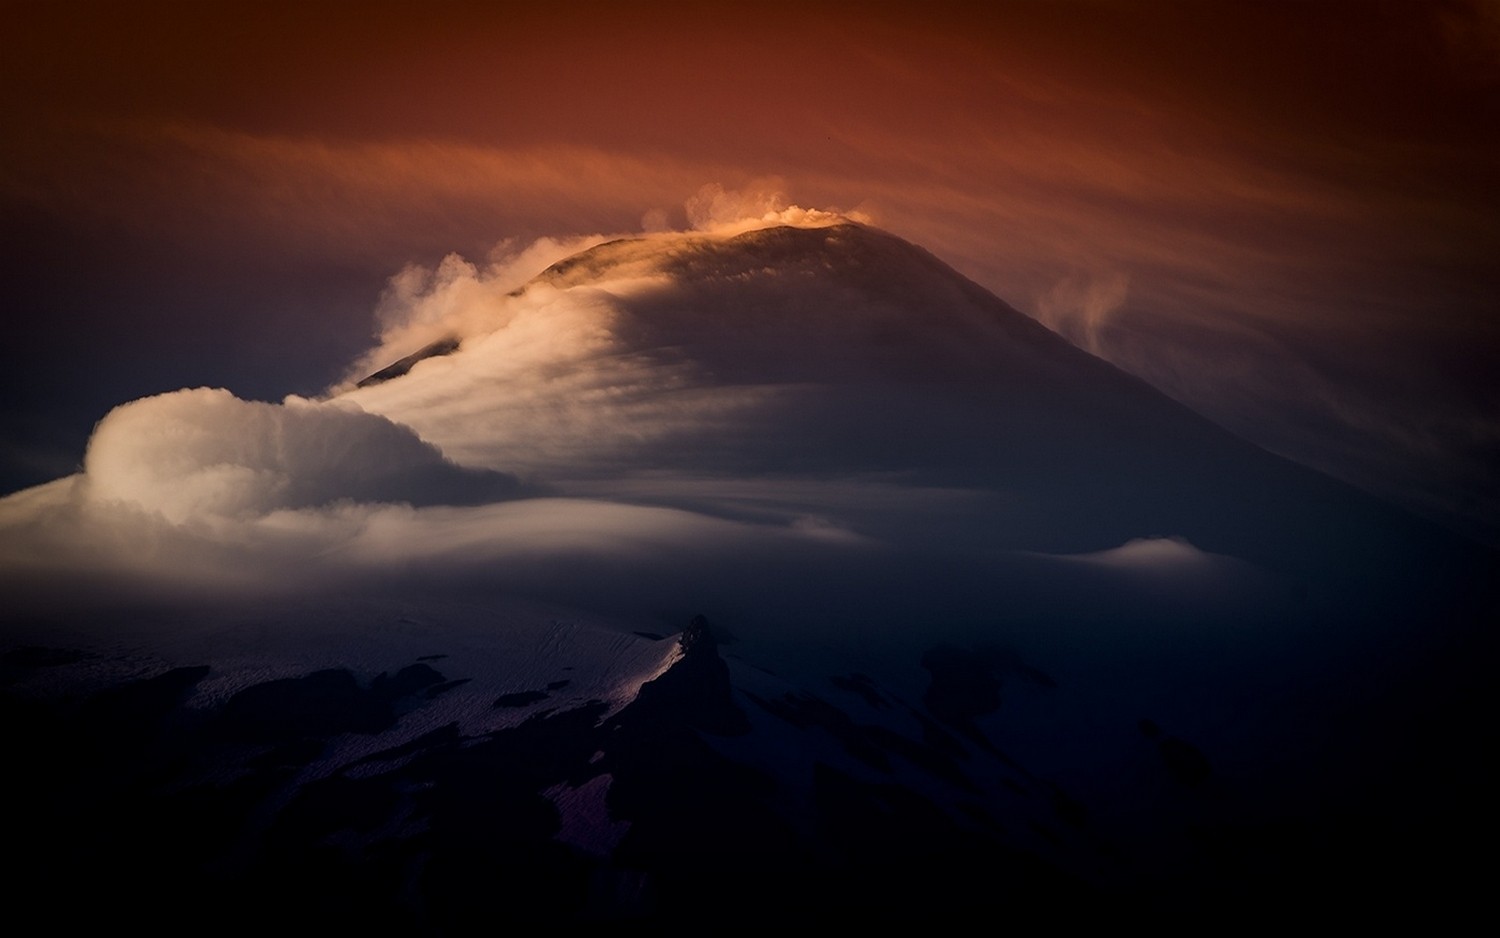 General 1500x938 nature landscape mountains volcano snowy peak sunset clouds Chile snowy mountain